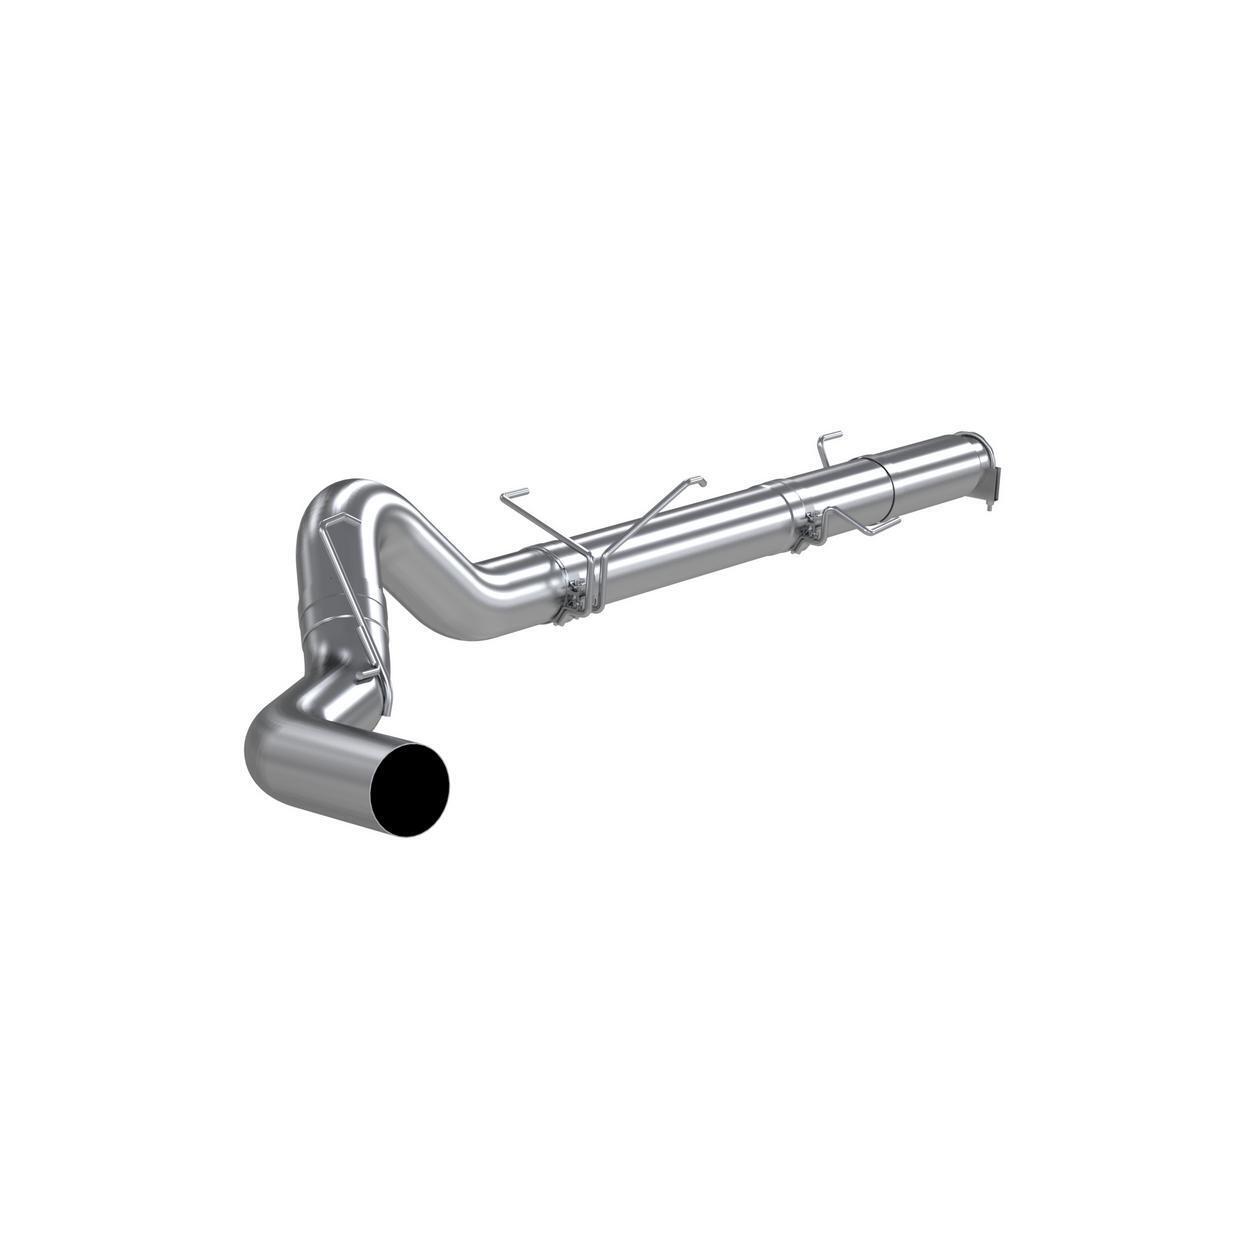 MBRP Exhaust System Kit for 2006-2007 Dodge Ram 3500